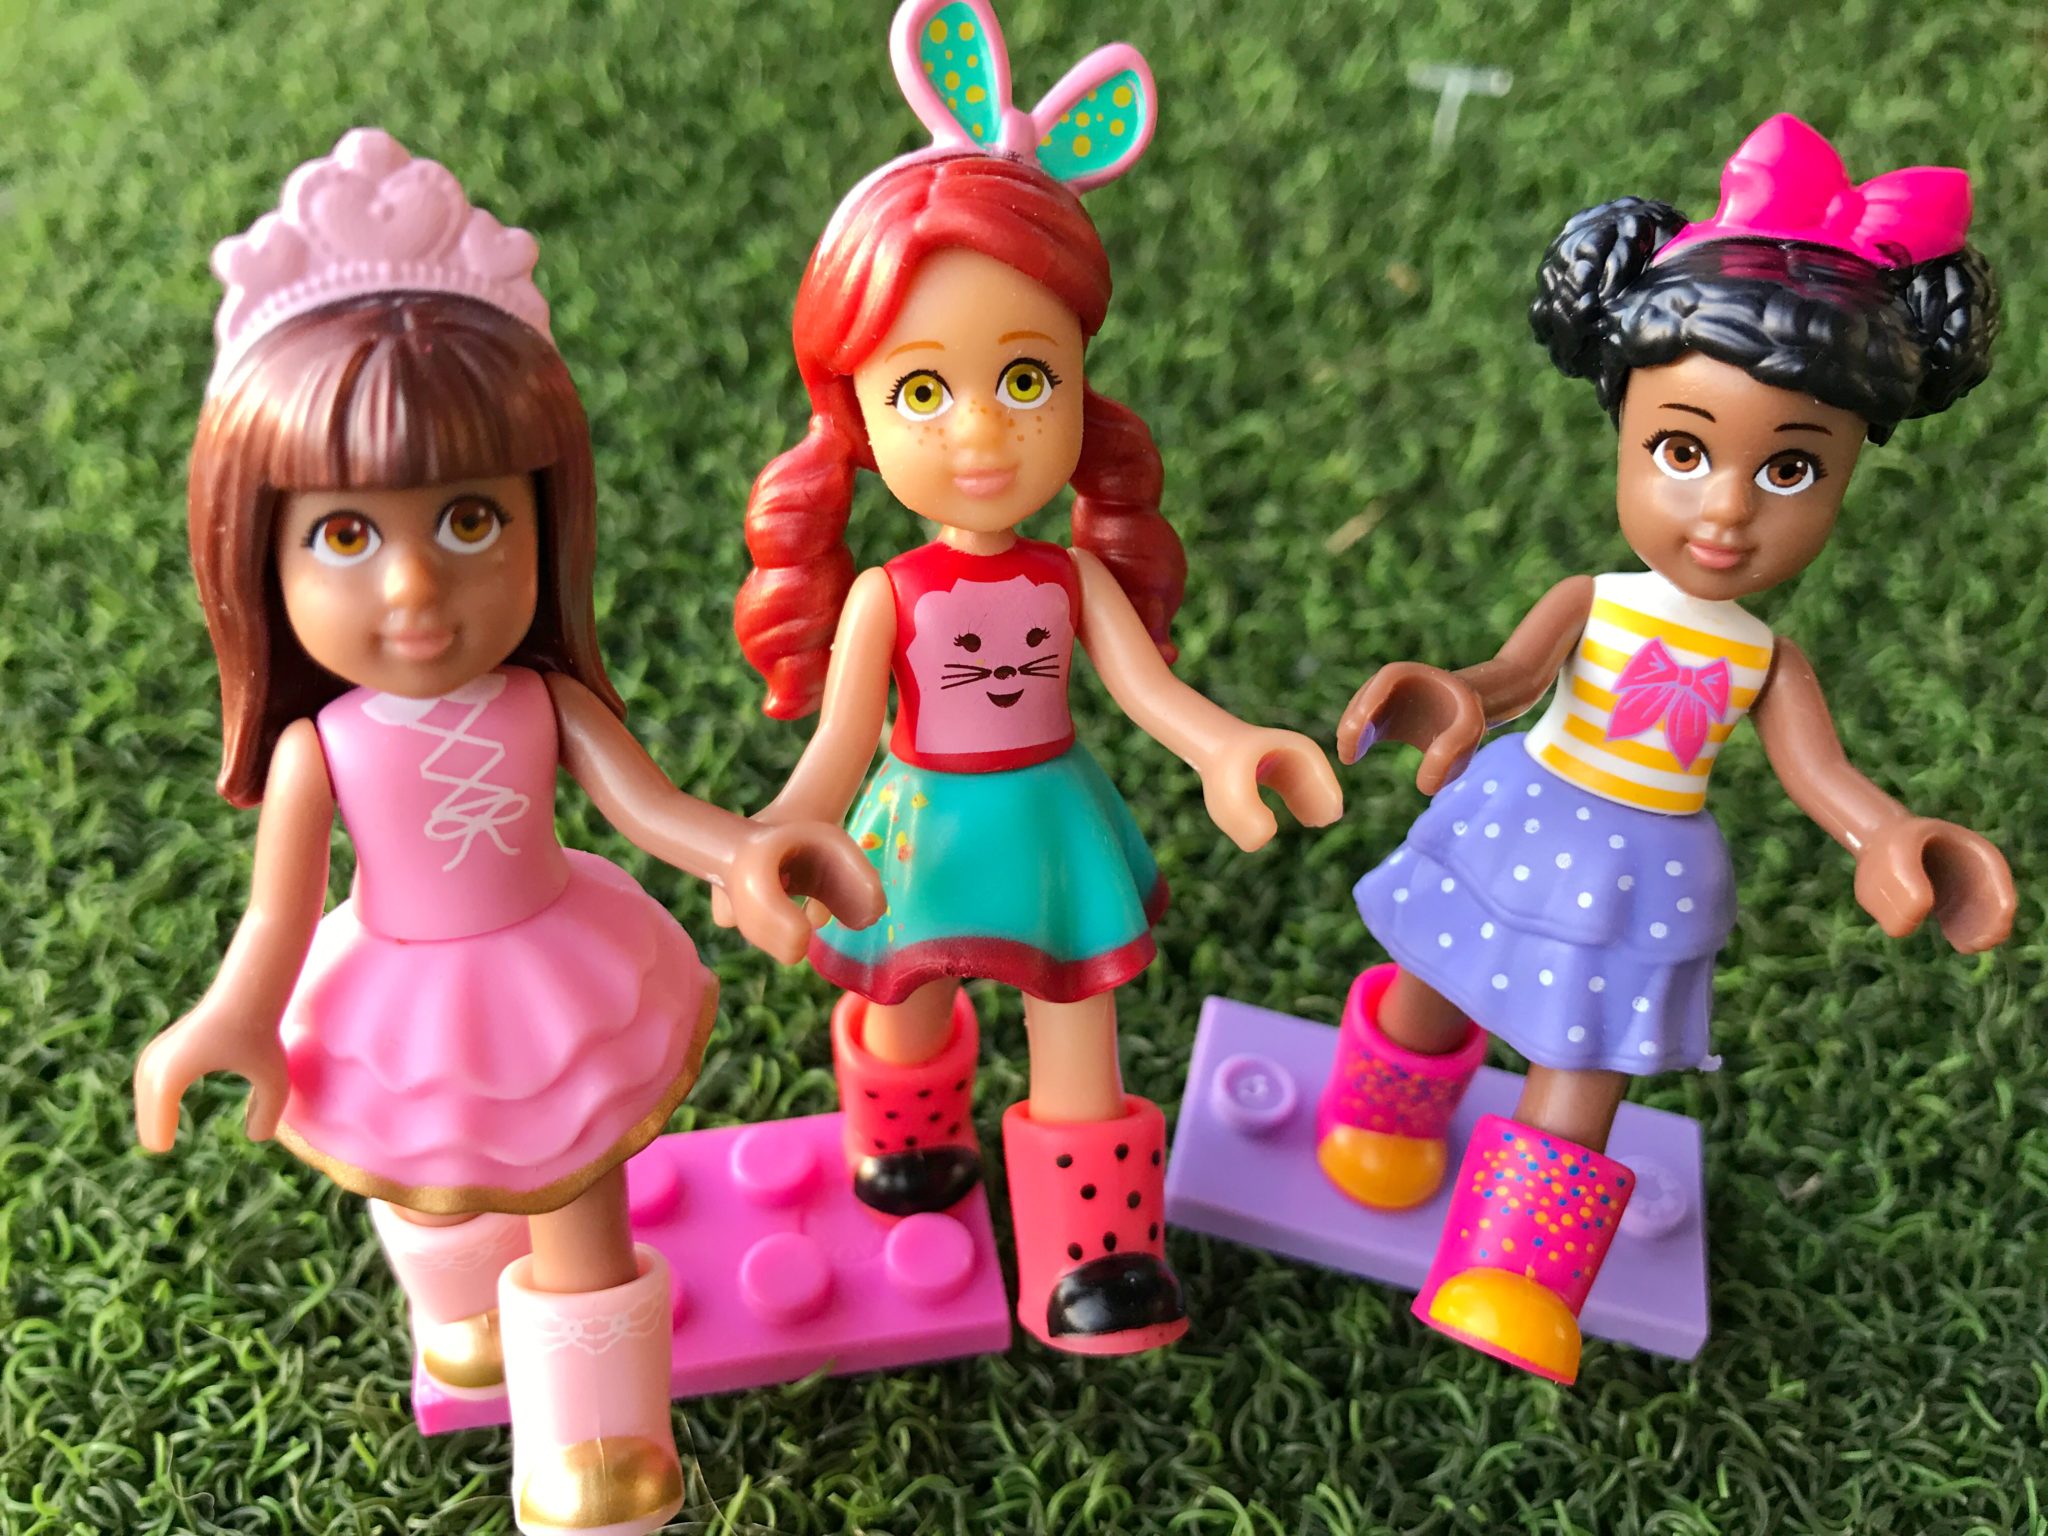 WellieWishers dolls from Mega Construx